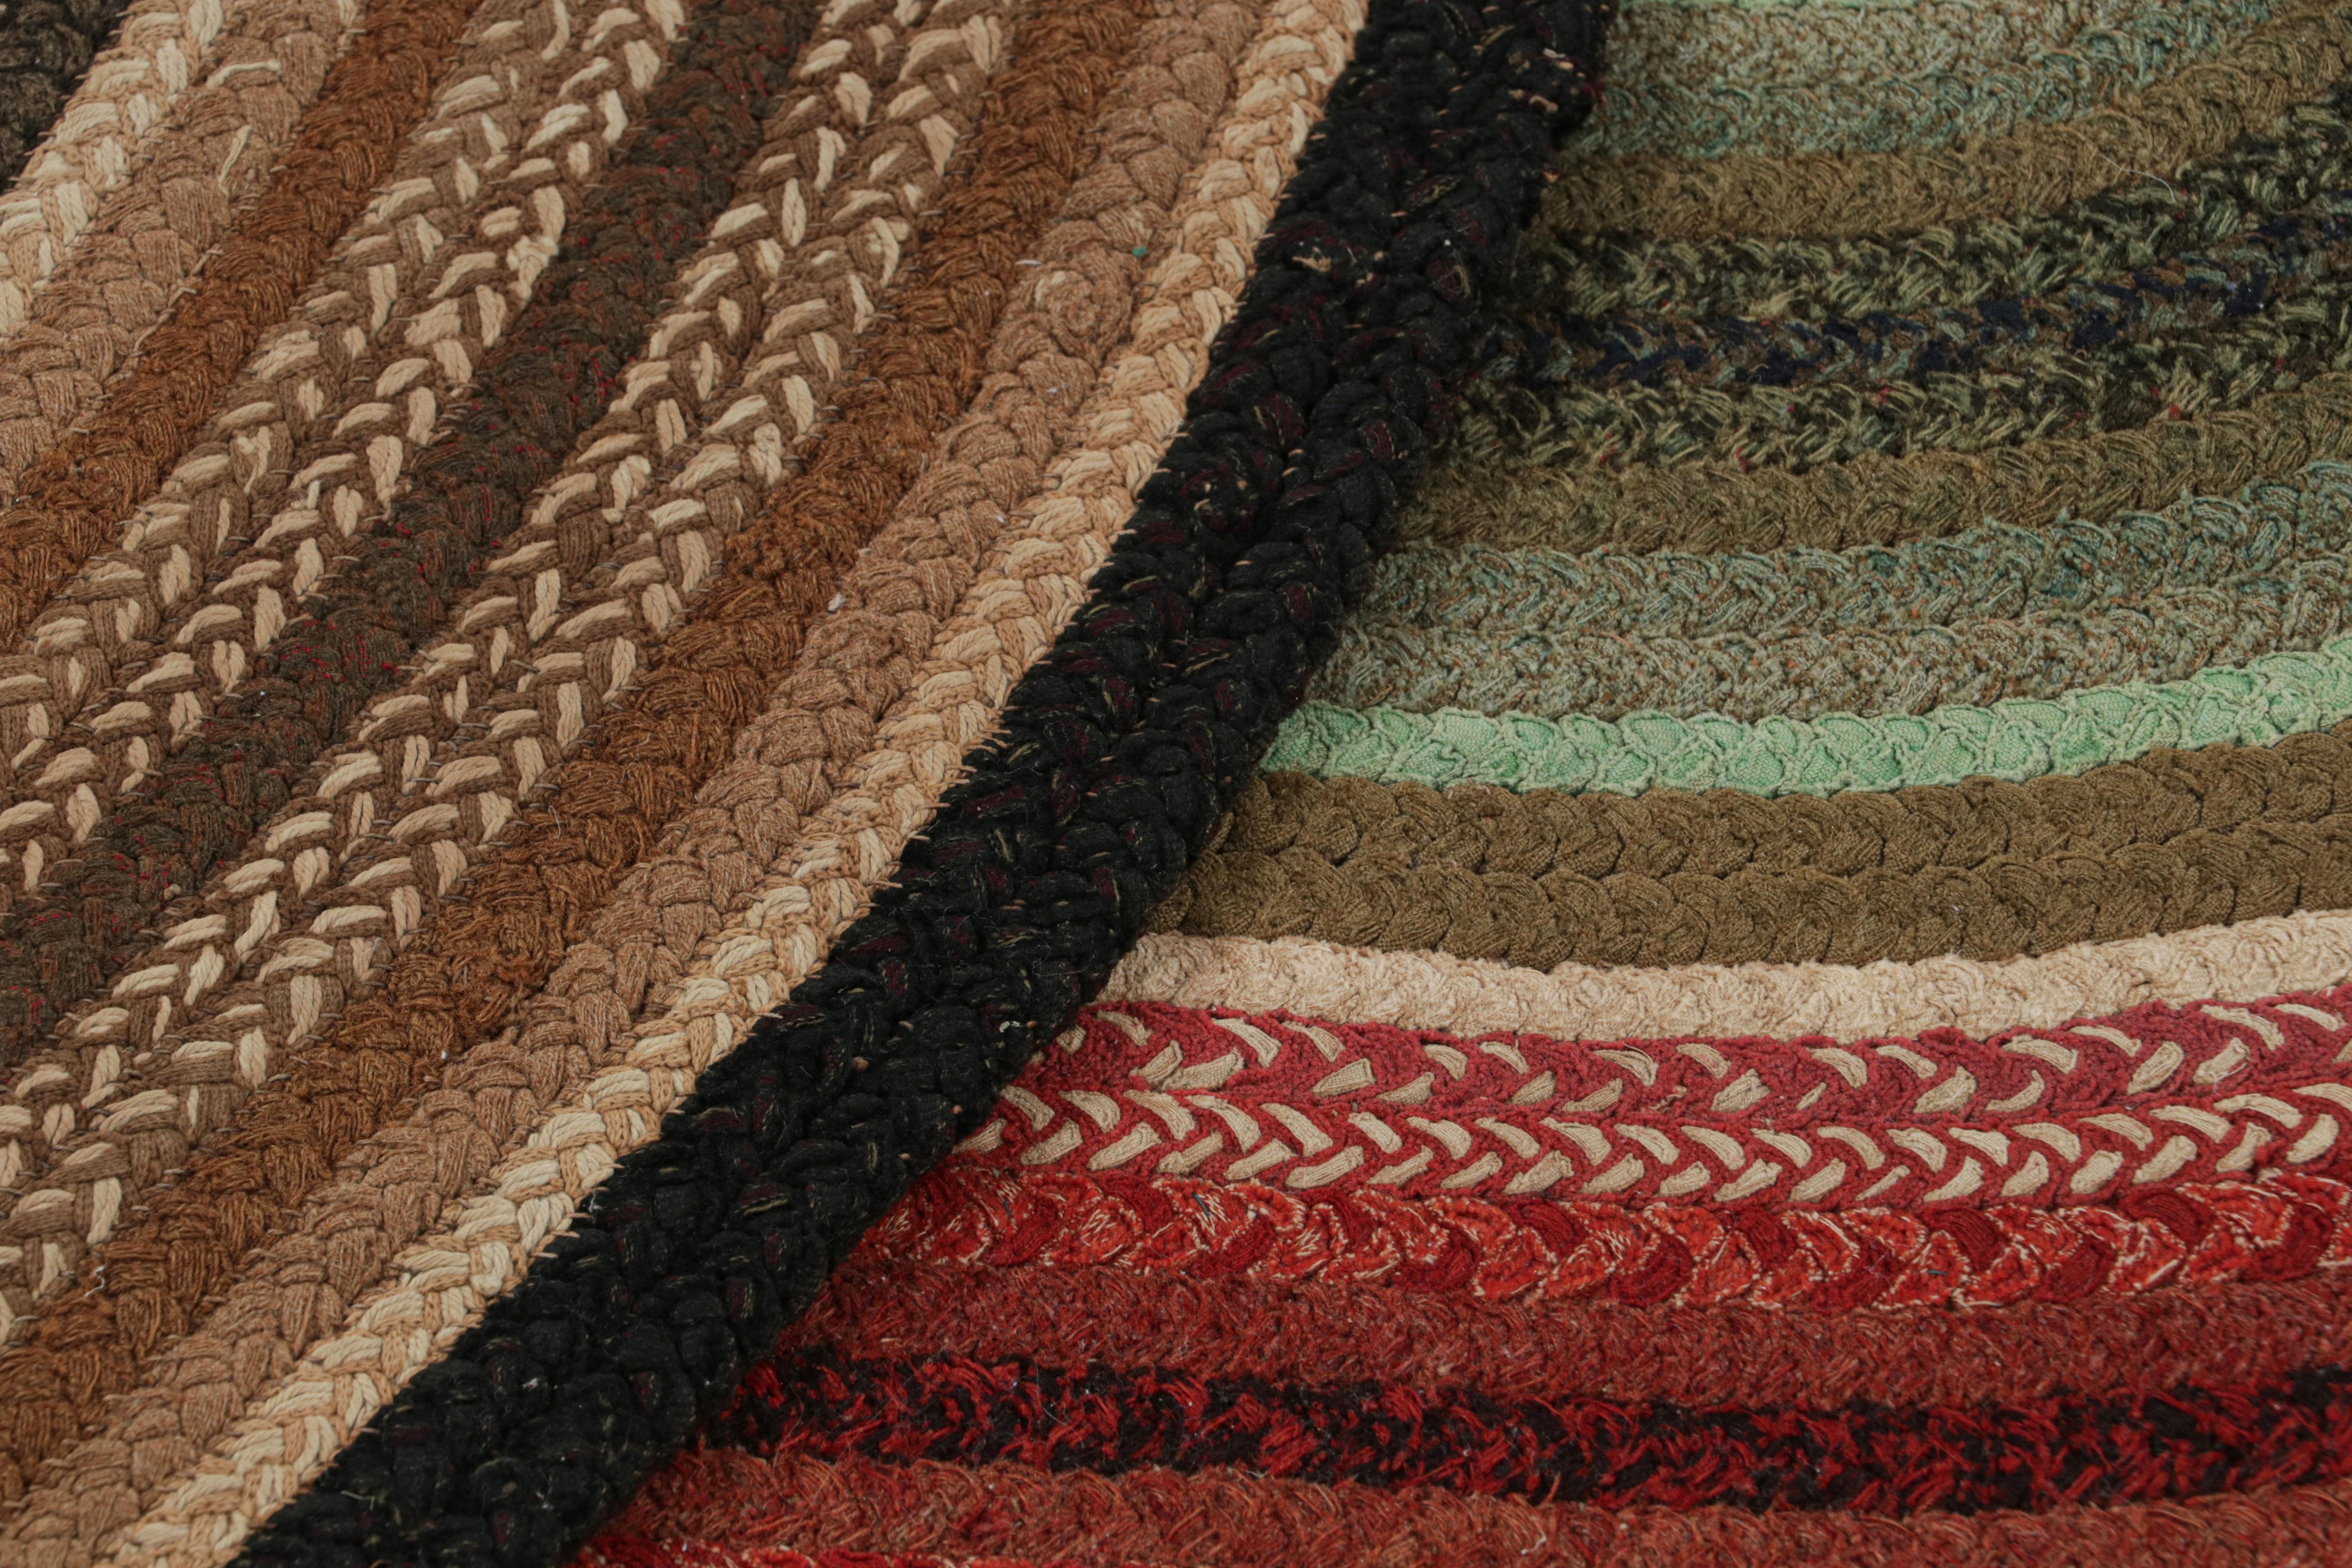 Fabric Antique Hooked Oval Rug with Polychromatic Braided Stripes, from Rug & Kilim For Sale